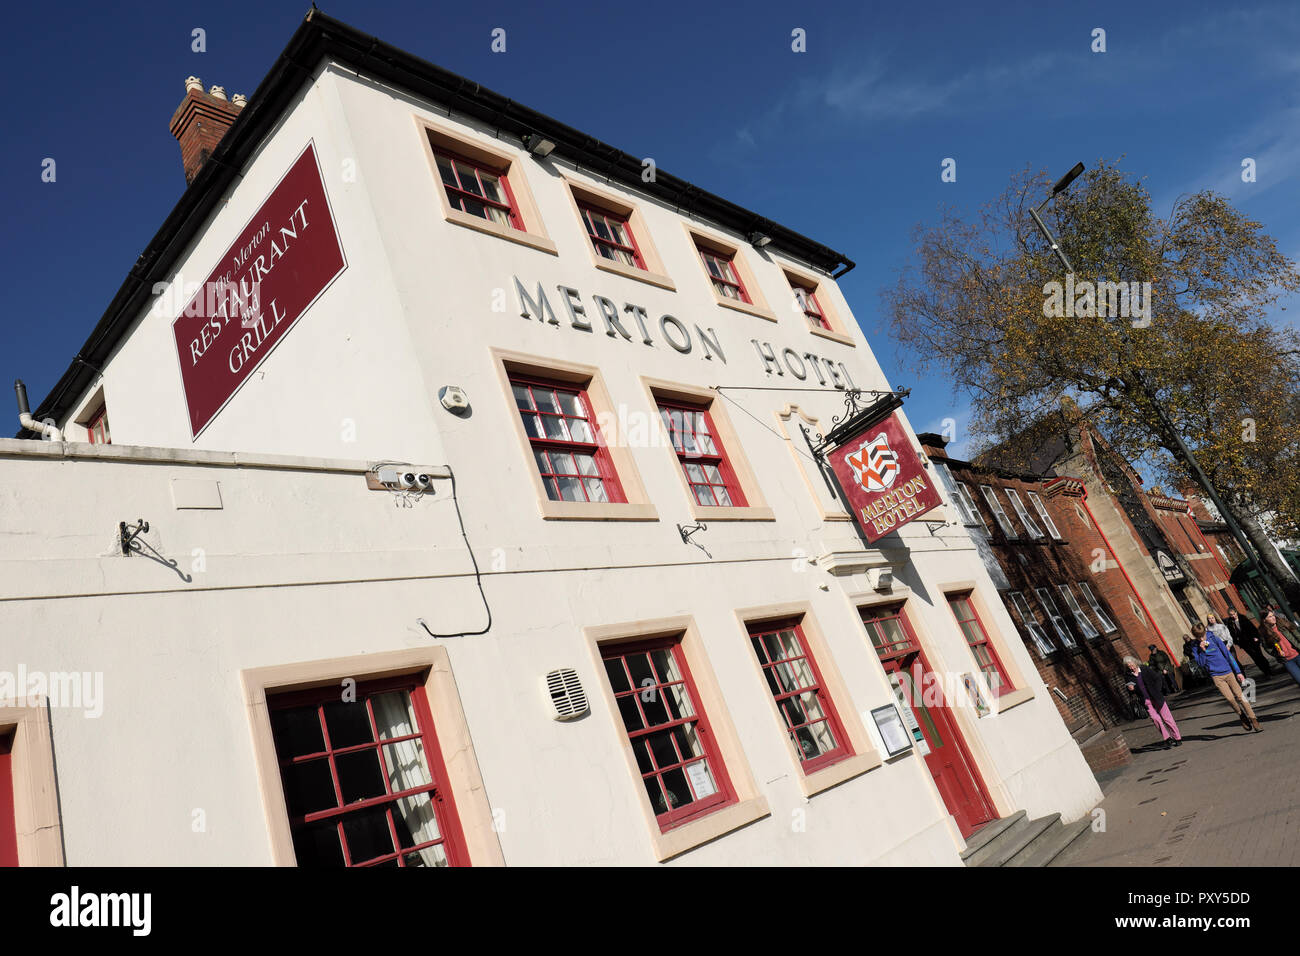 Hereford UK - The Merton Hotel pub and inn on Commercial Road Hereford Stock Photo